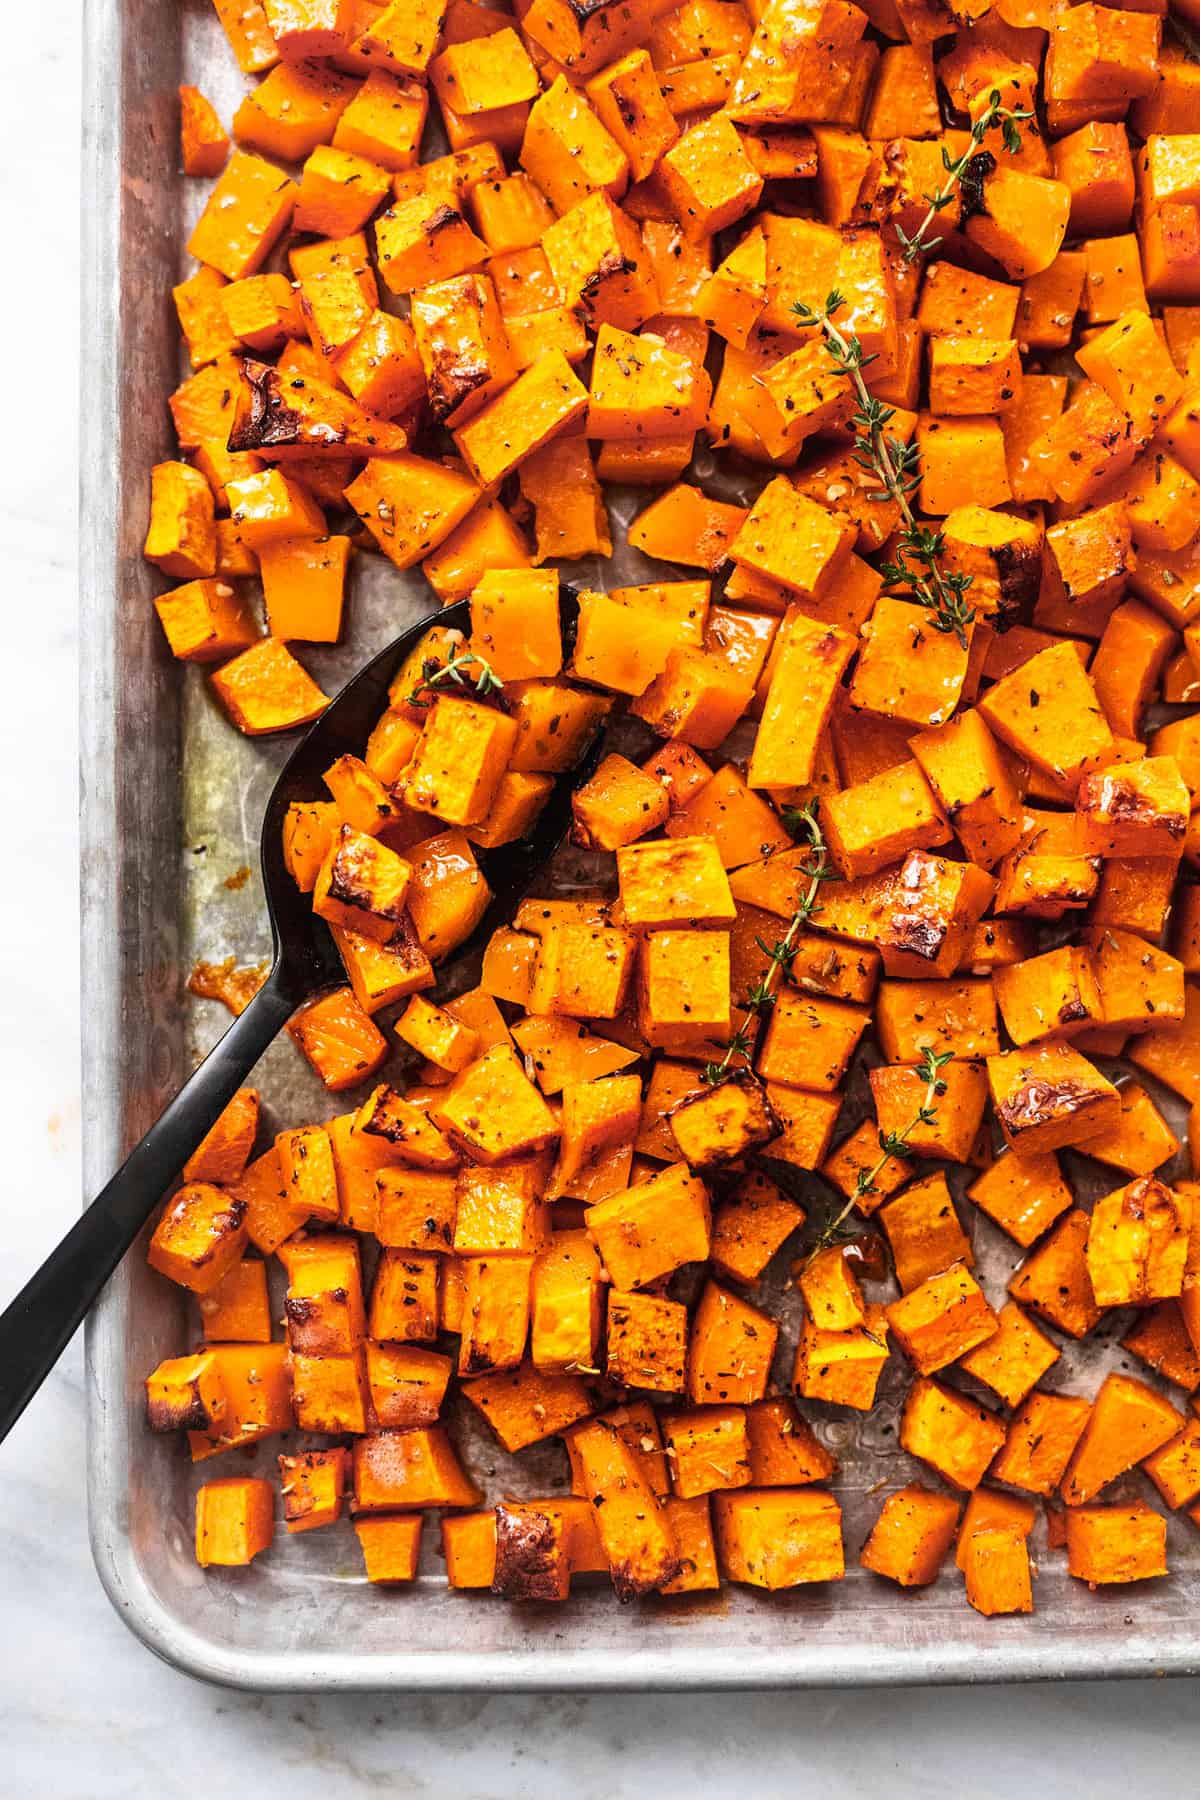 Roasted Butternut Squash Recipe (Oven Baked)